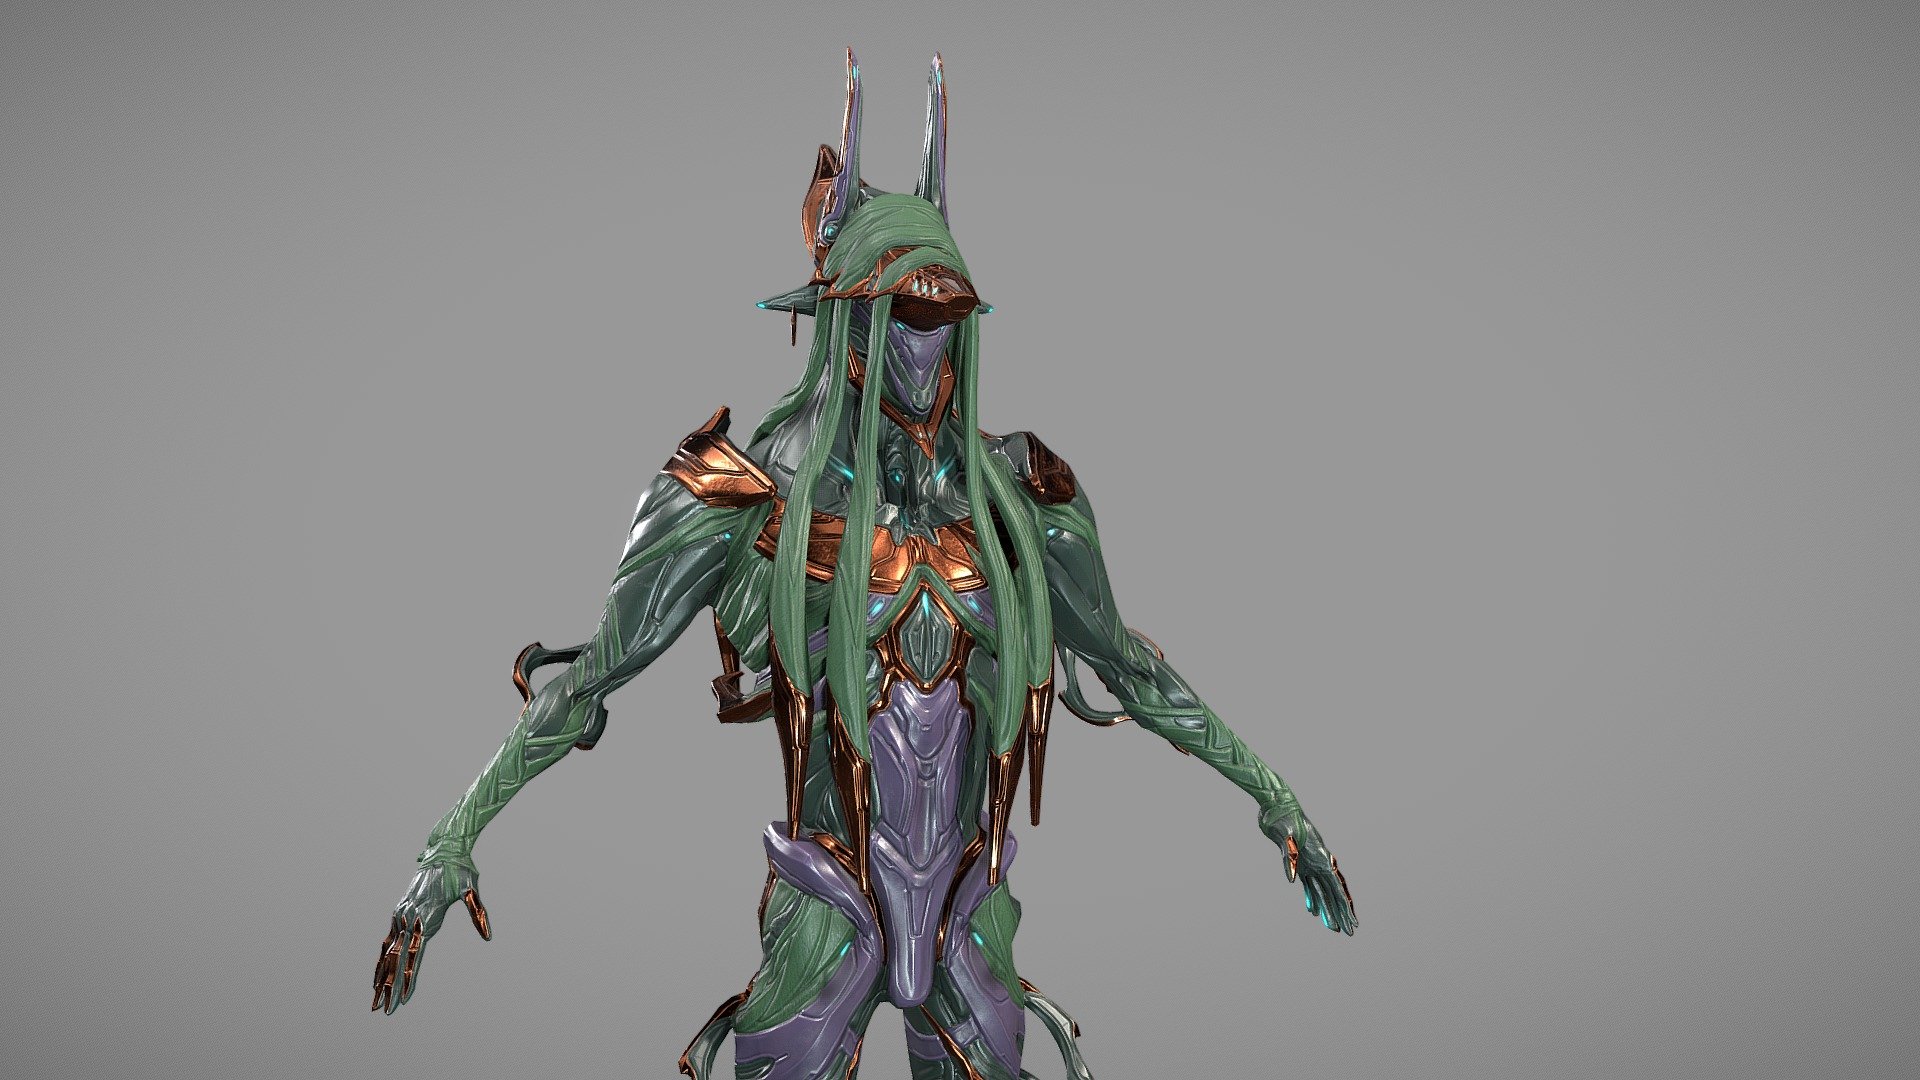 An Egyptian, Anubis / God of the Dead themed Skin for the Warframe, &lsquo;Nekros'.

Note:  the textures on the body / helmet / the helmet mesh itself are our creations.

The Body base-mesh is property of Digital Extremes.

A Collaborative effort with the talented Vik / Cleonaturin!

Links to our Artstation pages:
https://www.artstation.com/cleonaturin
https://www.artstation.com/ryangk - Nekros Anpu Body & Helmet - 3D model by Ryan K. / Crackle2012 (@Crackle2012) 3d model